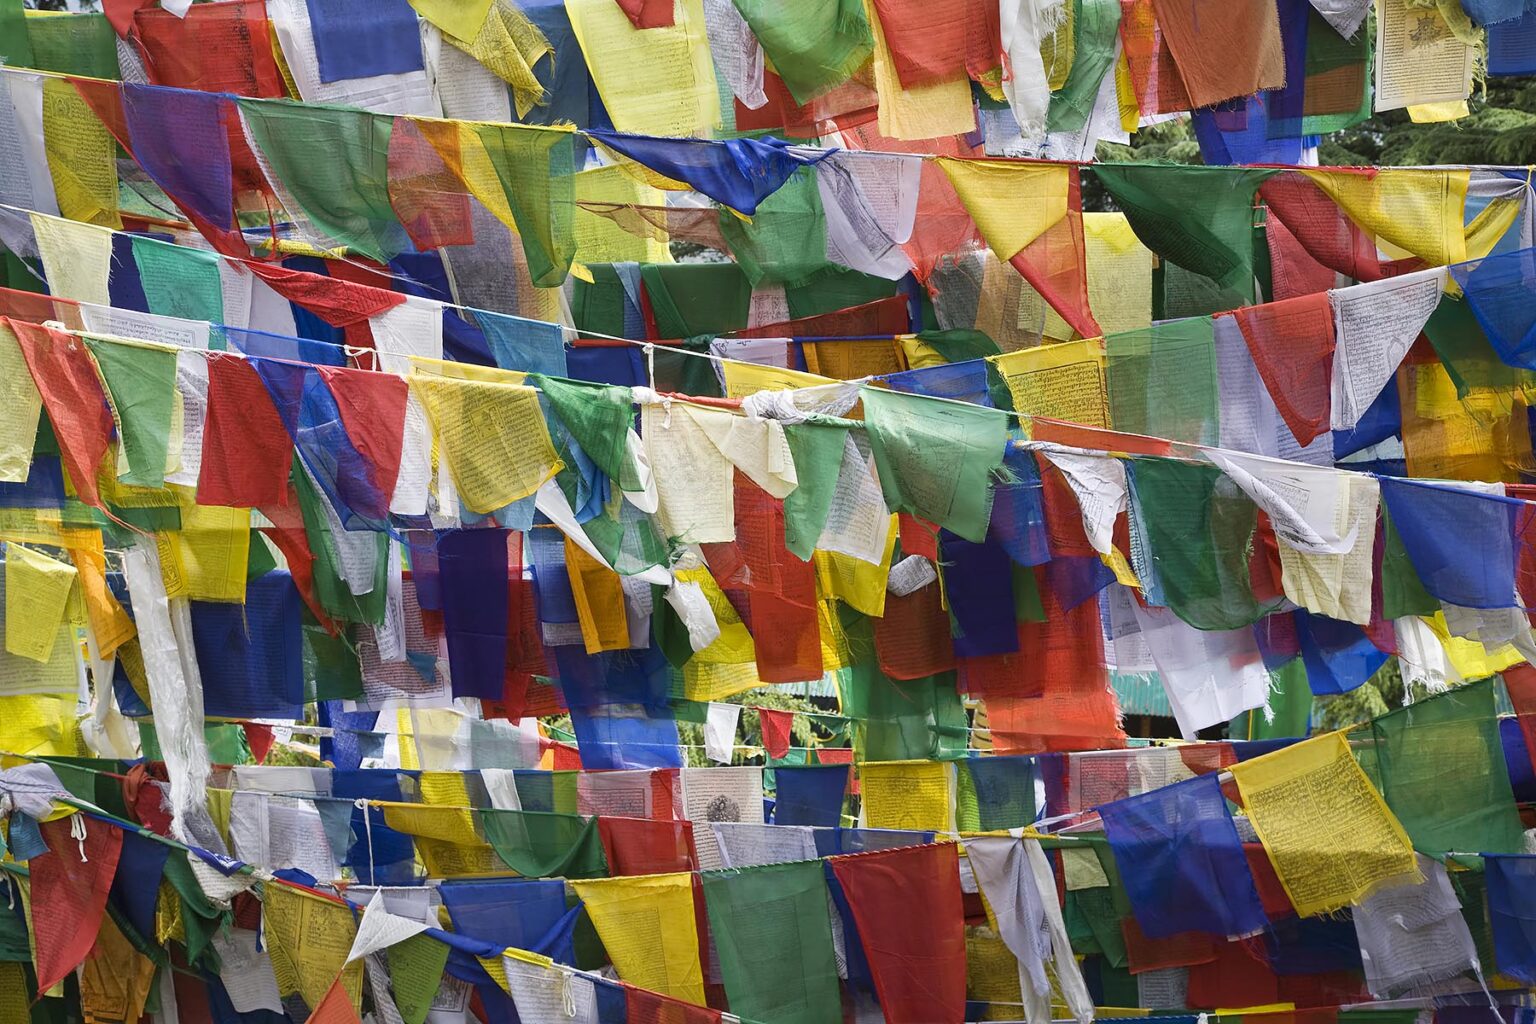 TIBETAN PRAYER FLAGS fly on the grounds of the TSUGLAGKHANG COMPLEX which is the DALAI LAMA'S residence in exile in MCLEOD GANG - DHARMSALA, INDIA